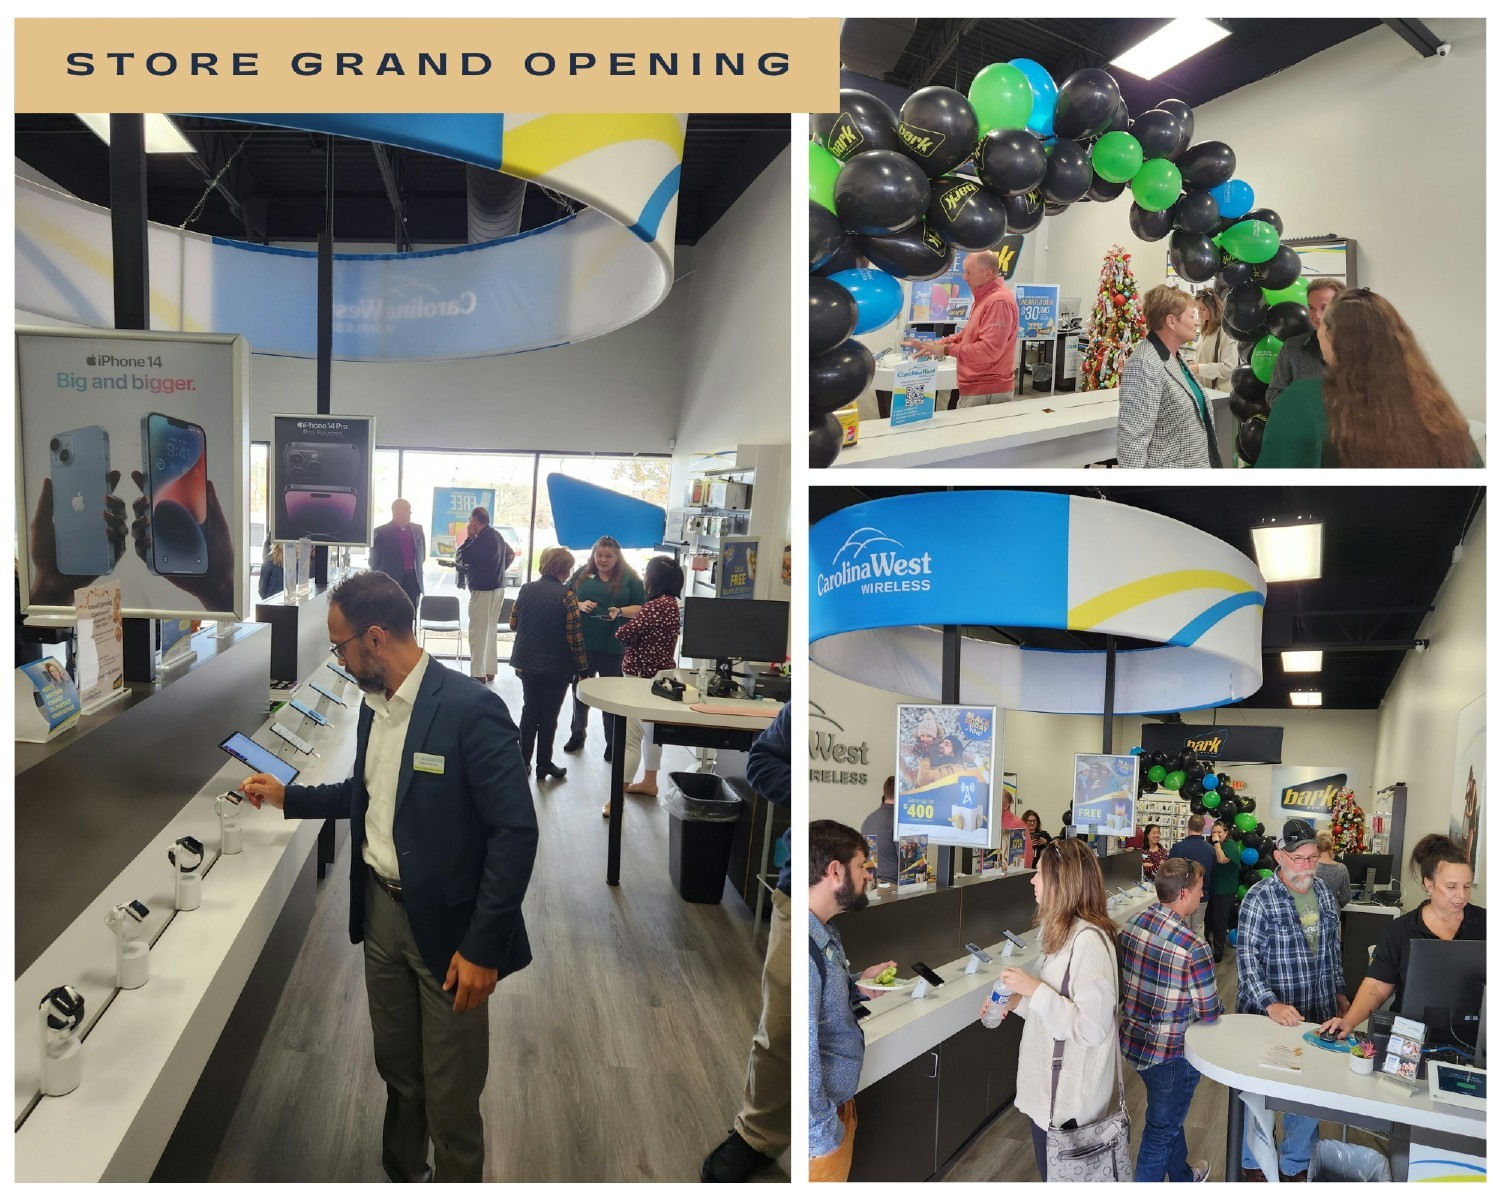 Inviting the community to come celebrate a new store's grand opening